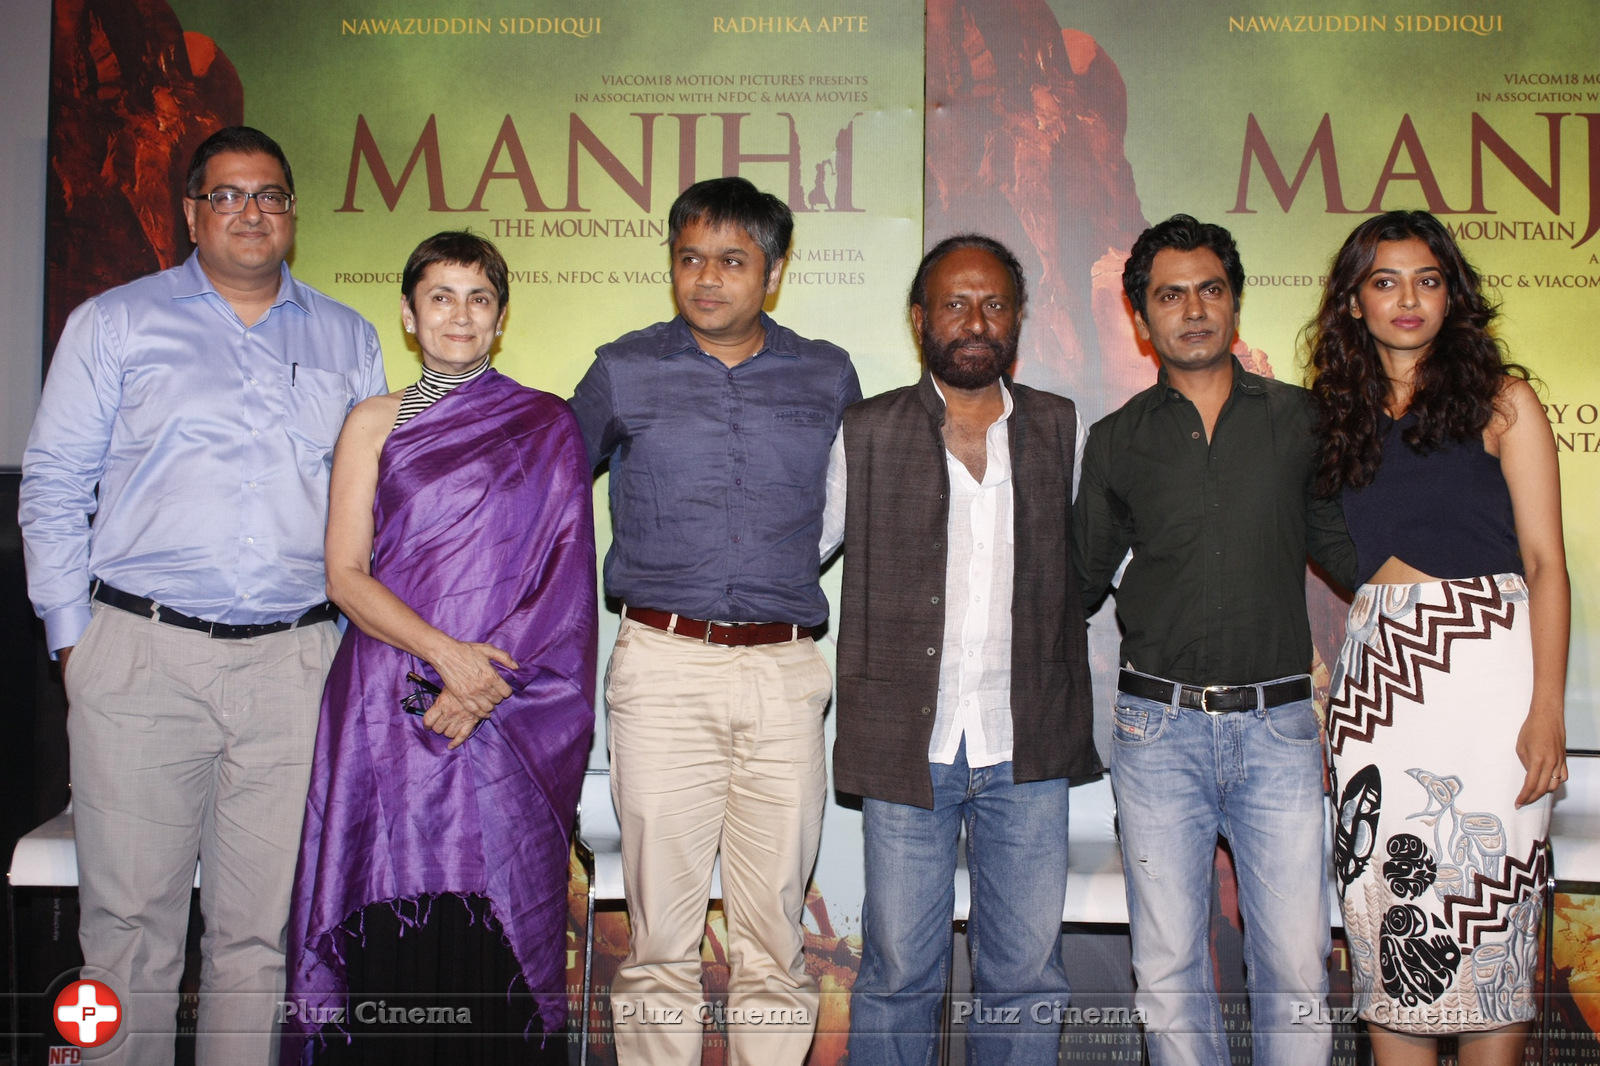 Trailer launch of film Manjhi The Mountain Man Photos | Picture 1062009